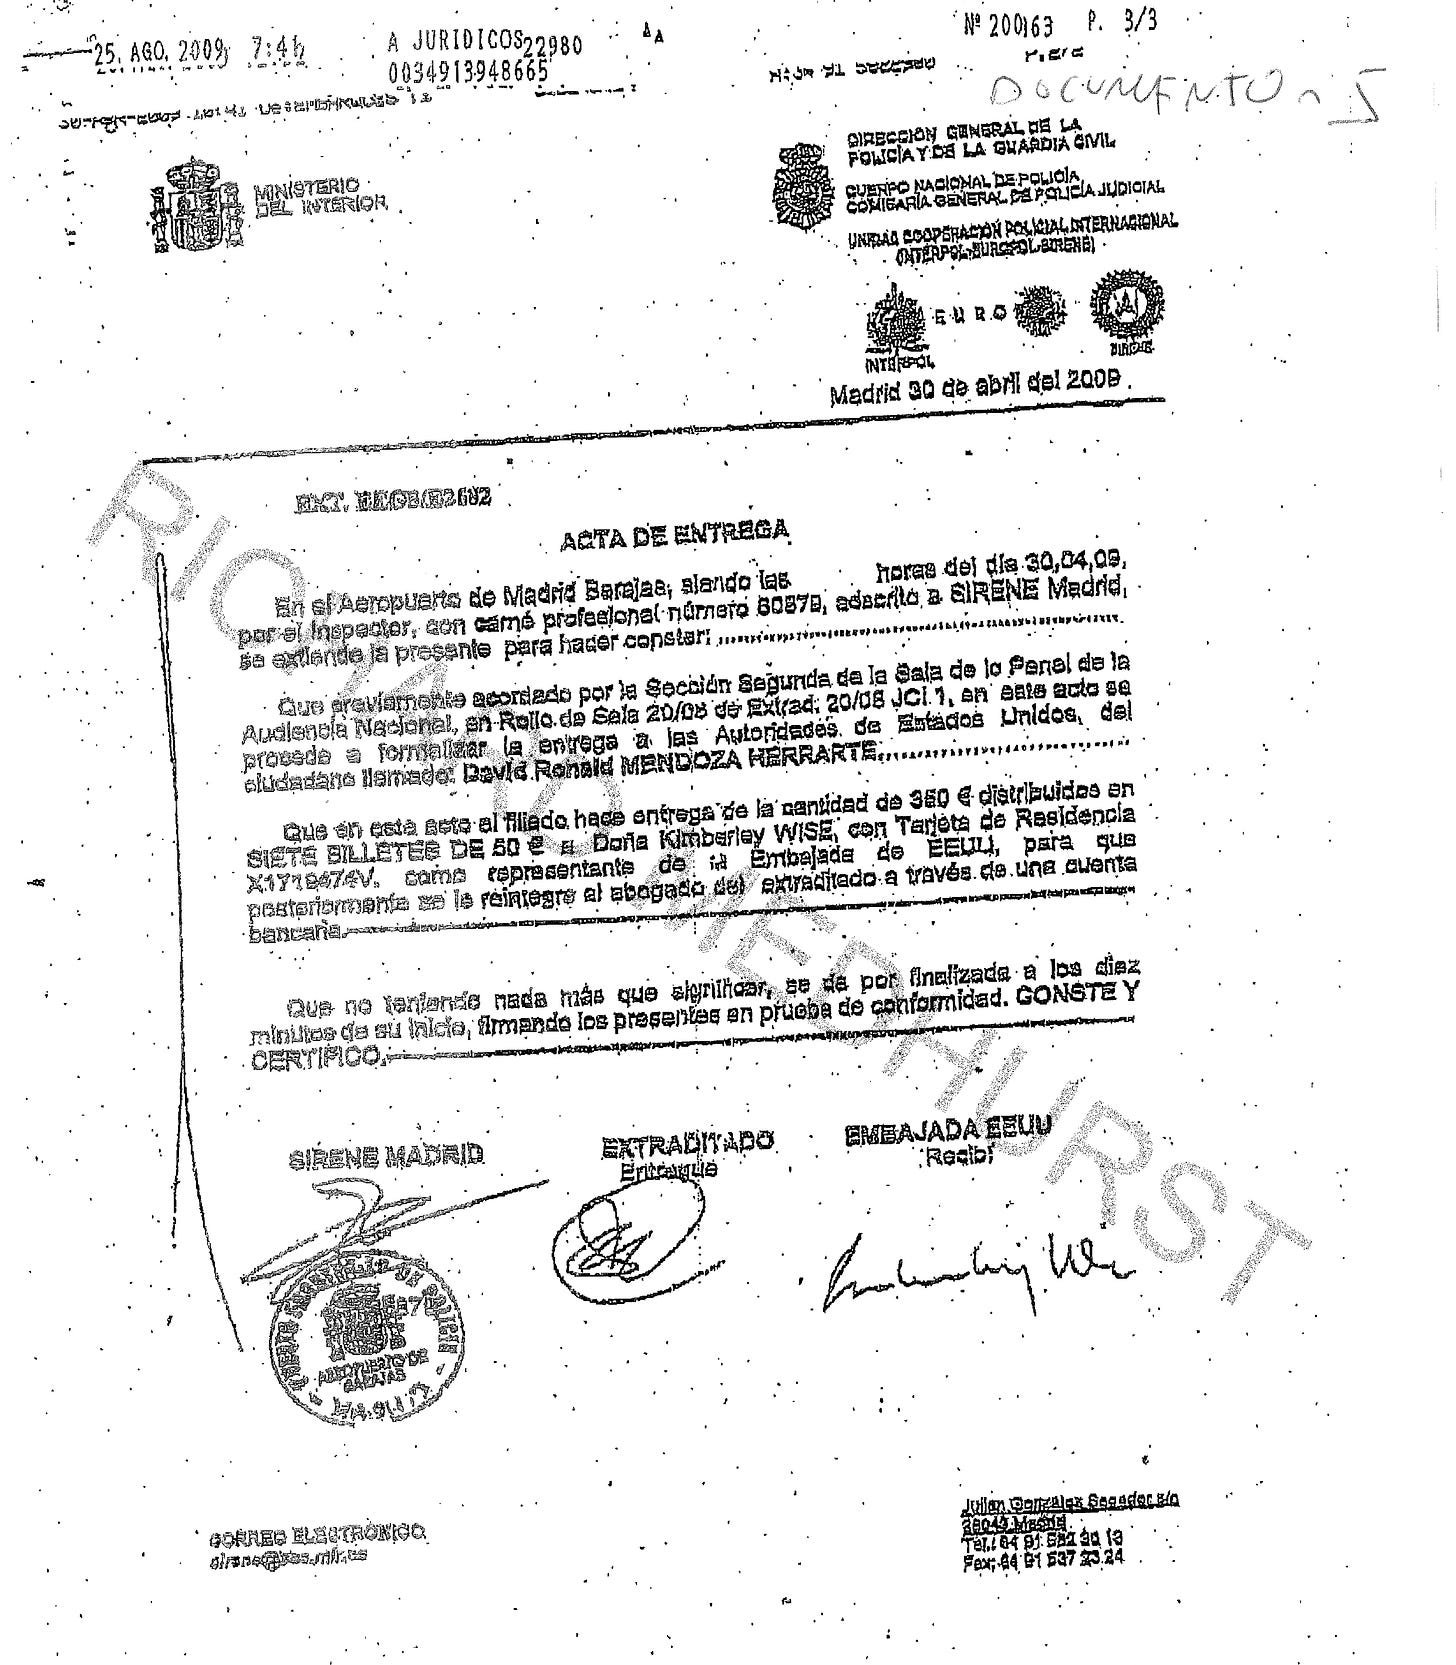 The Acta de Entrega, a contract between Mendoza, the United States and Spain, stipulating that his extradition comply with the conditions imposed by the Spanish National Court